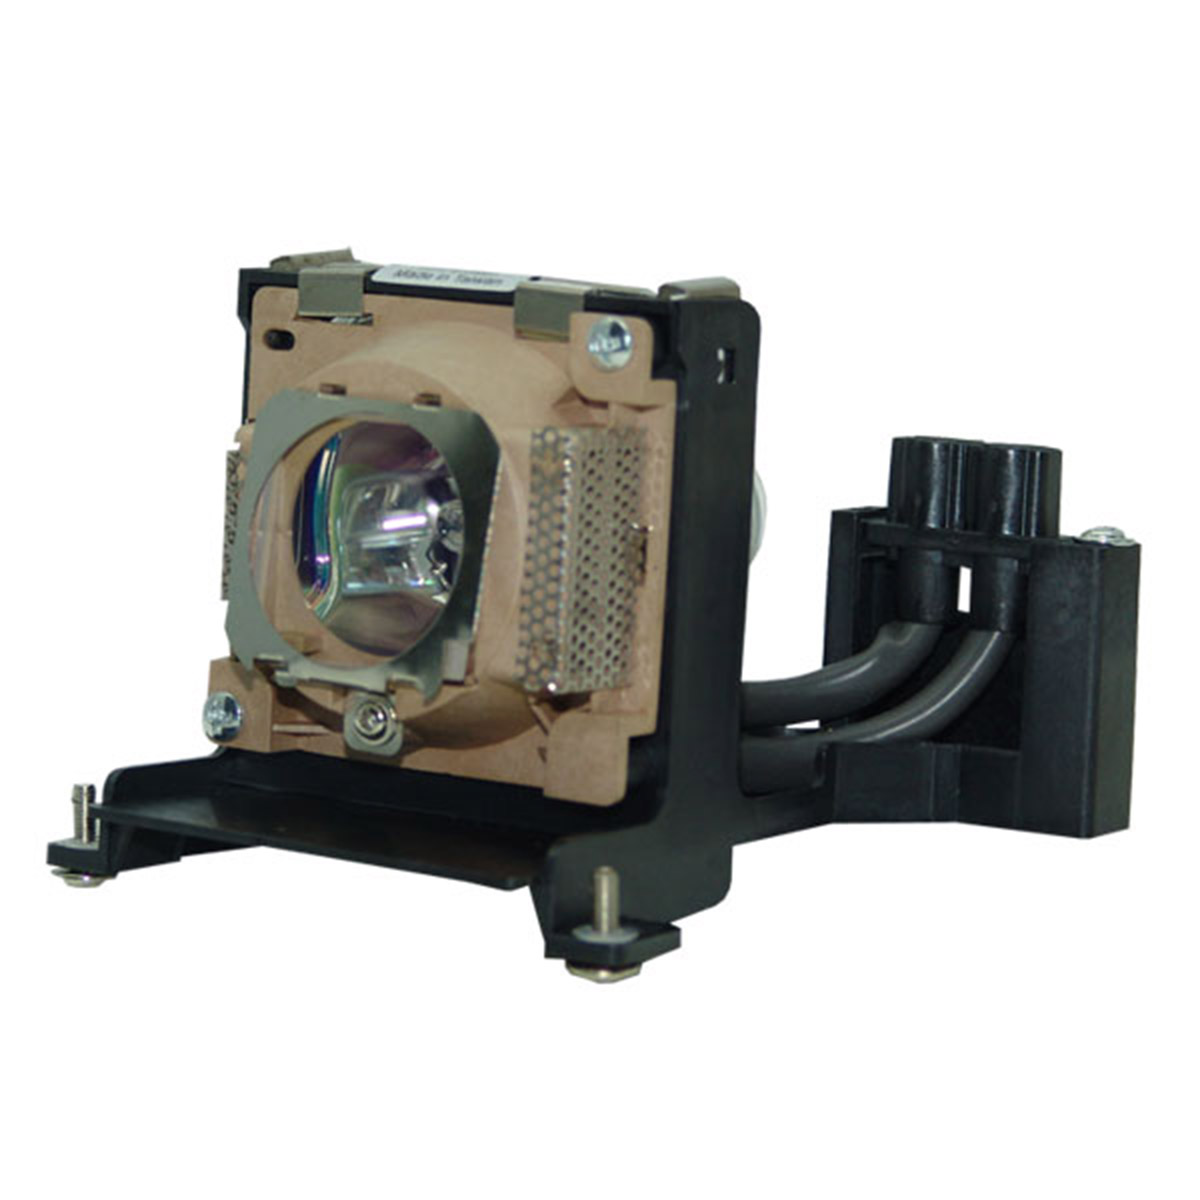 Buyquest L1624A  OEM Replacement Projector Lamp for HP. Includes New U 250W Bulb and Housing